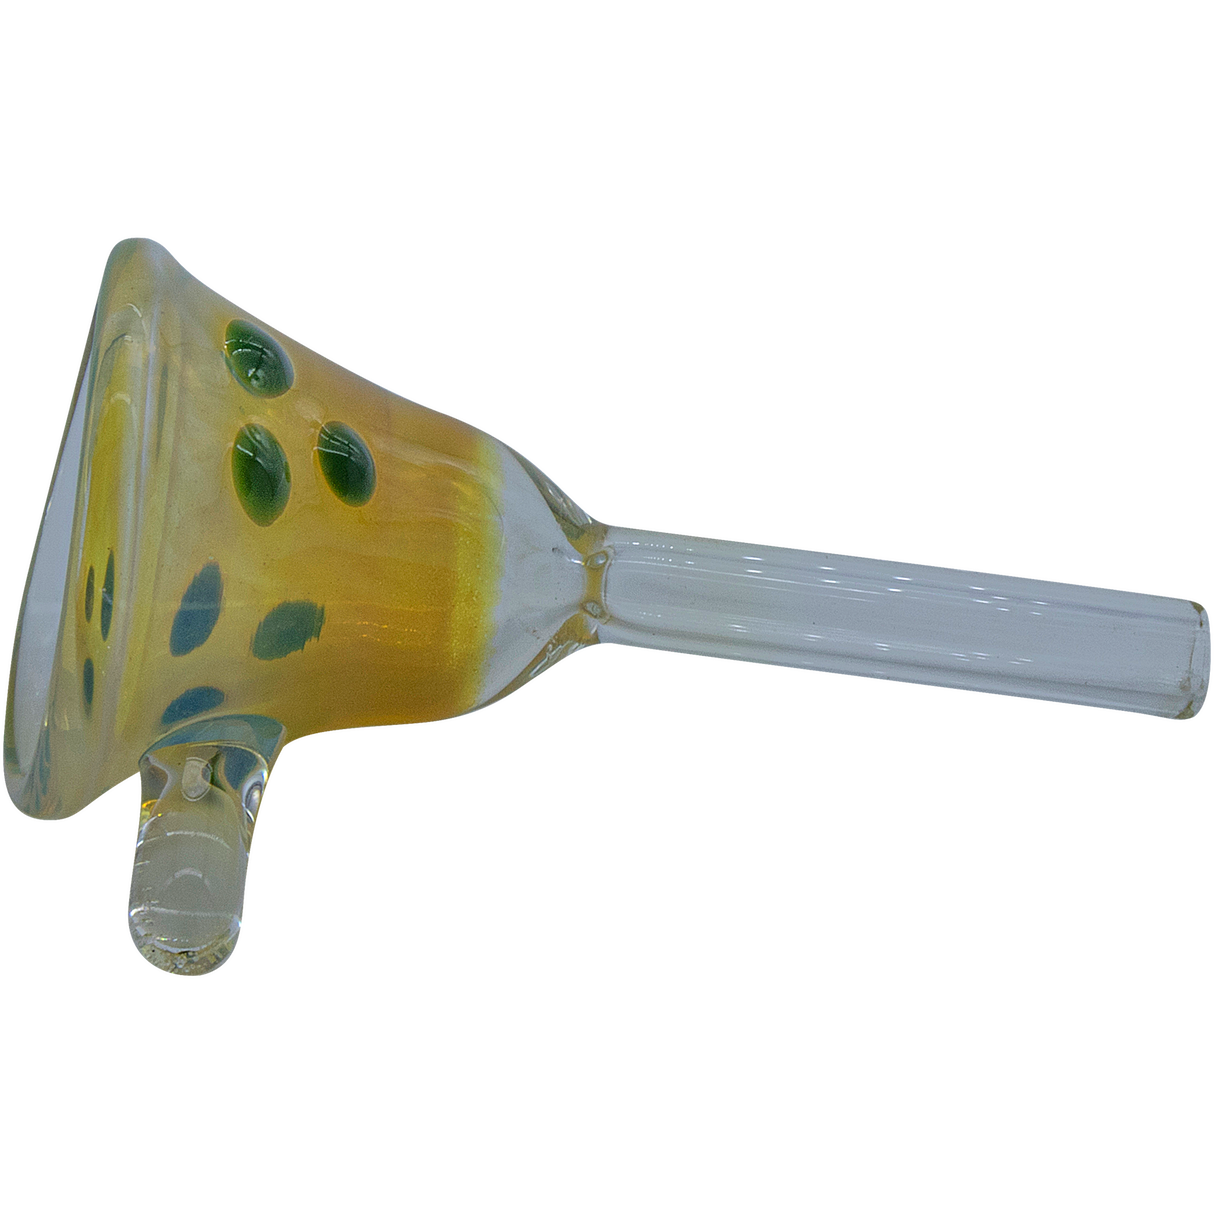 LA Pipes "Mission Bell" Pull-Stem Slide Bowl with Assorted Colors for Bongs, Side View